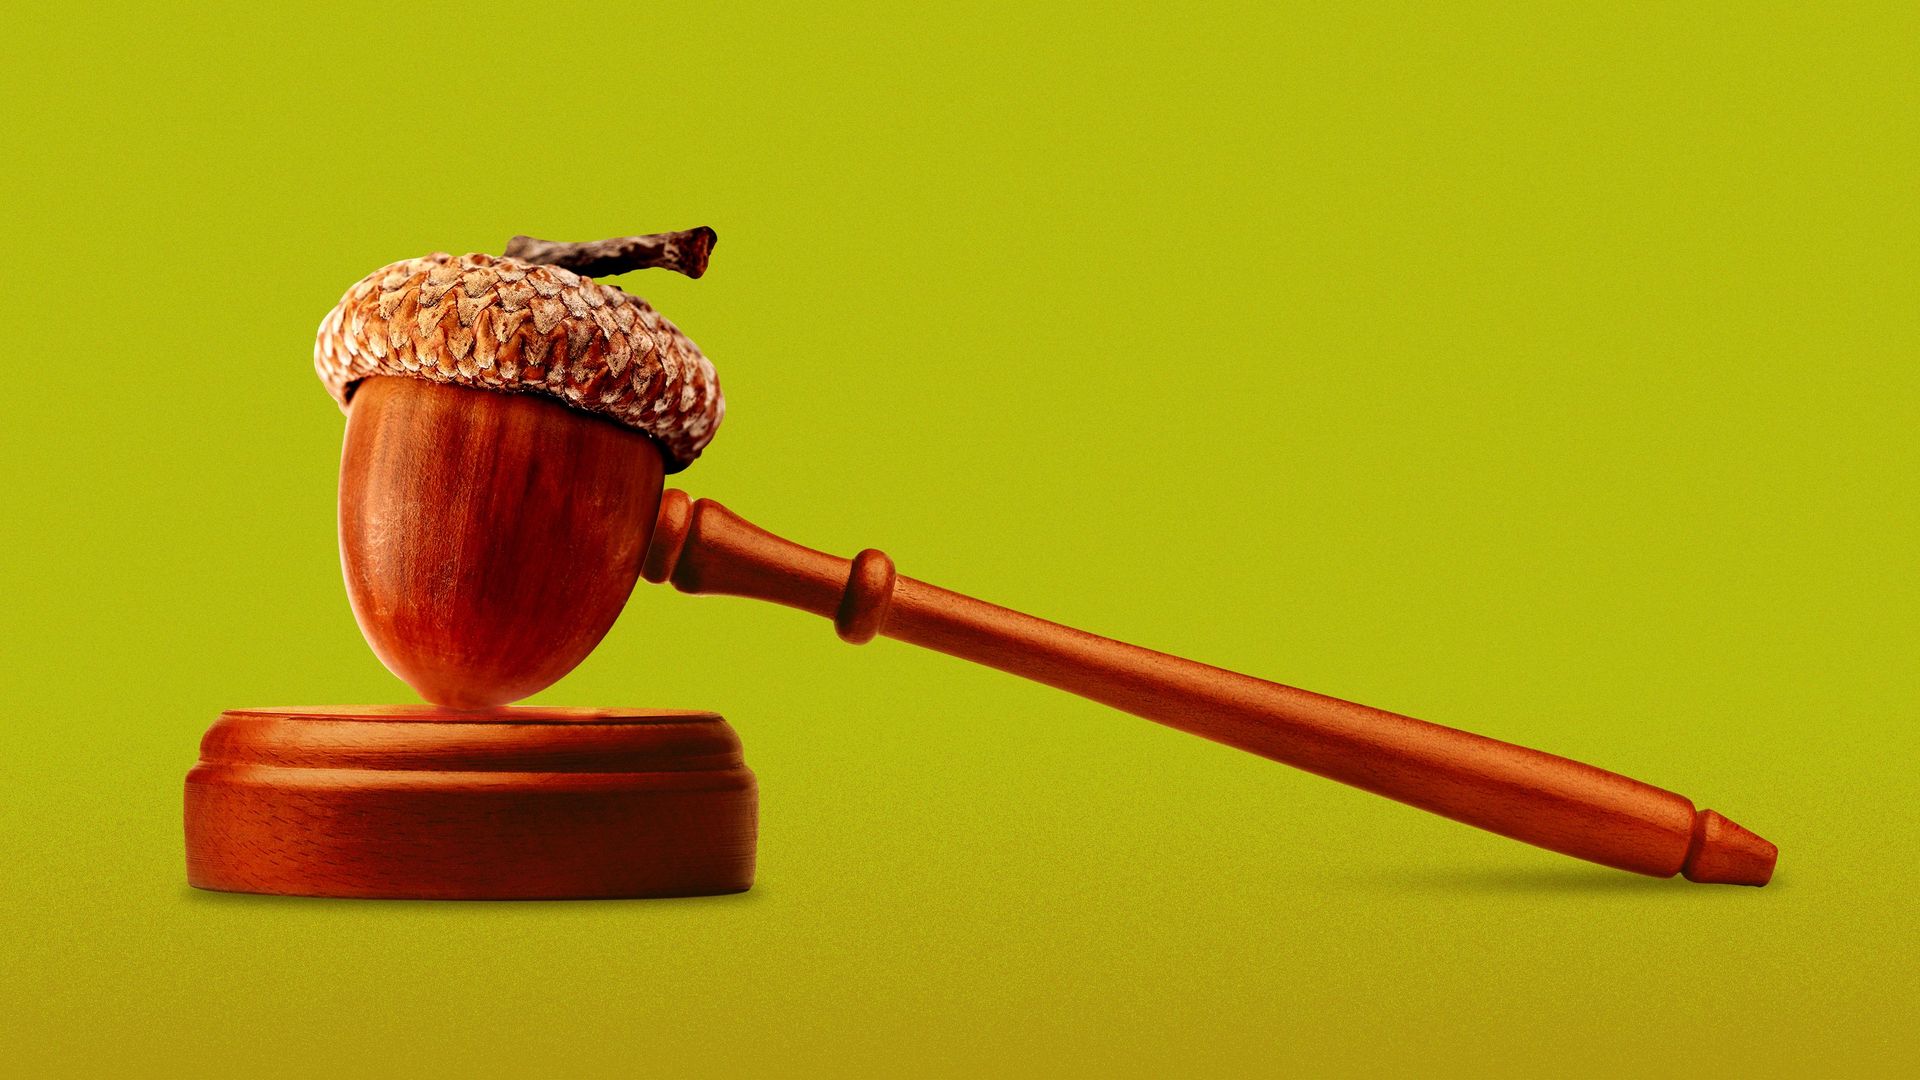 Illustration of a gavel made out of an acorn.